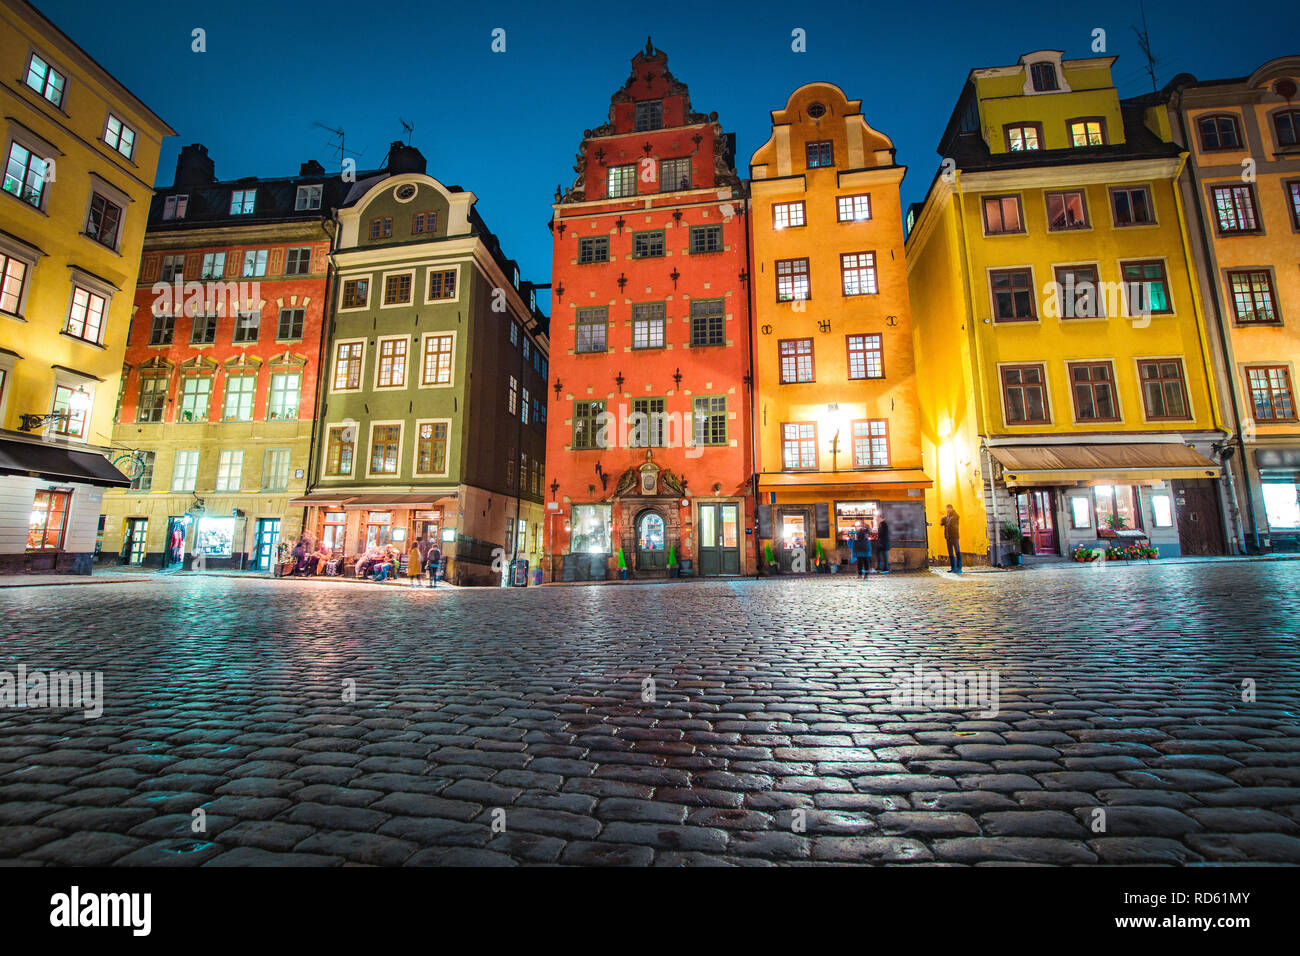 Classic view of colorful houses at famous Stortorget town square in Stockholm's historic Gamla Stan (Old Town) at night, central Stockholm, Sweden Stock Photo